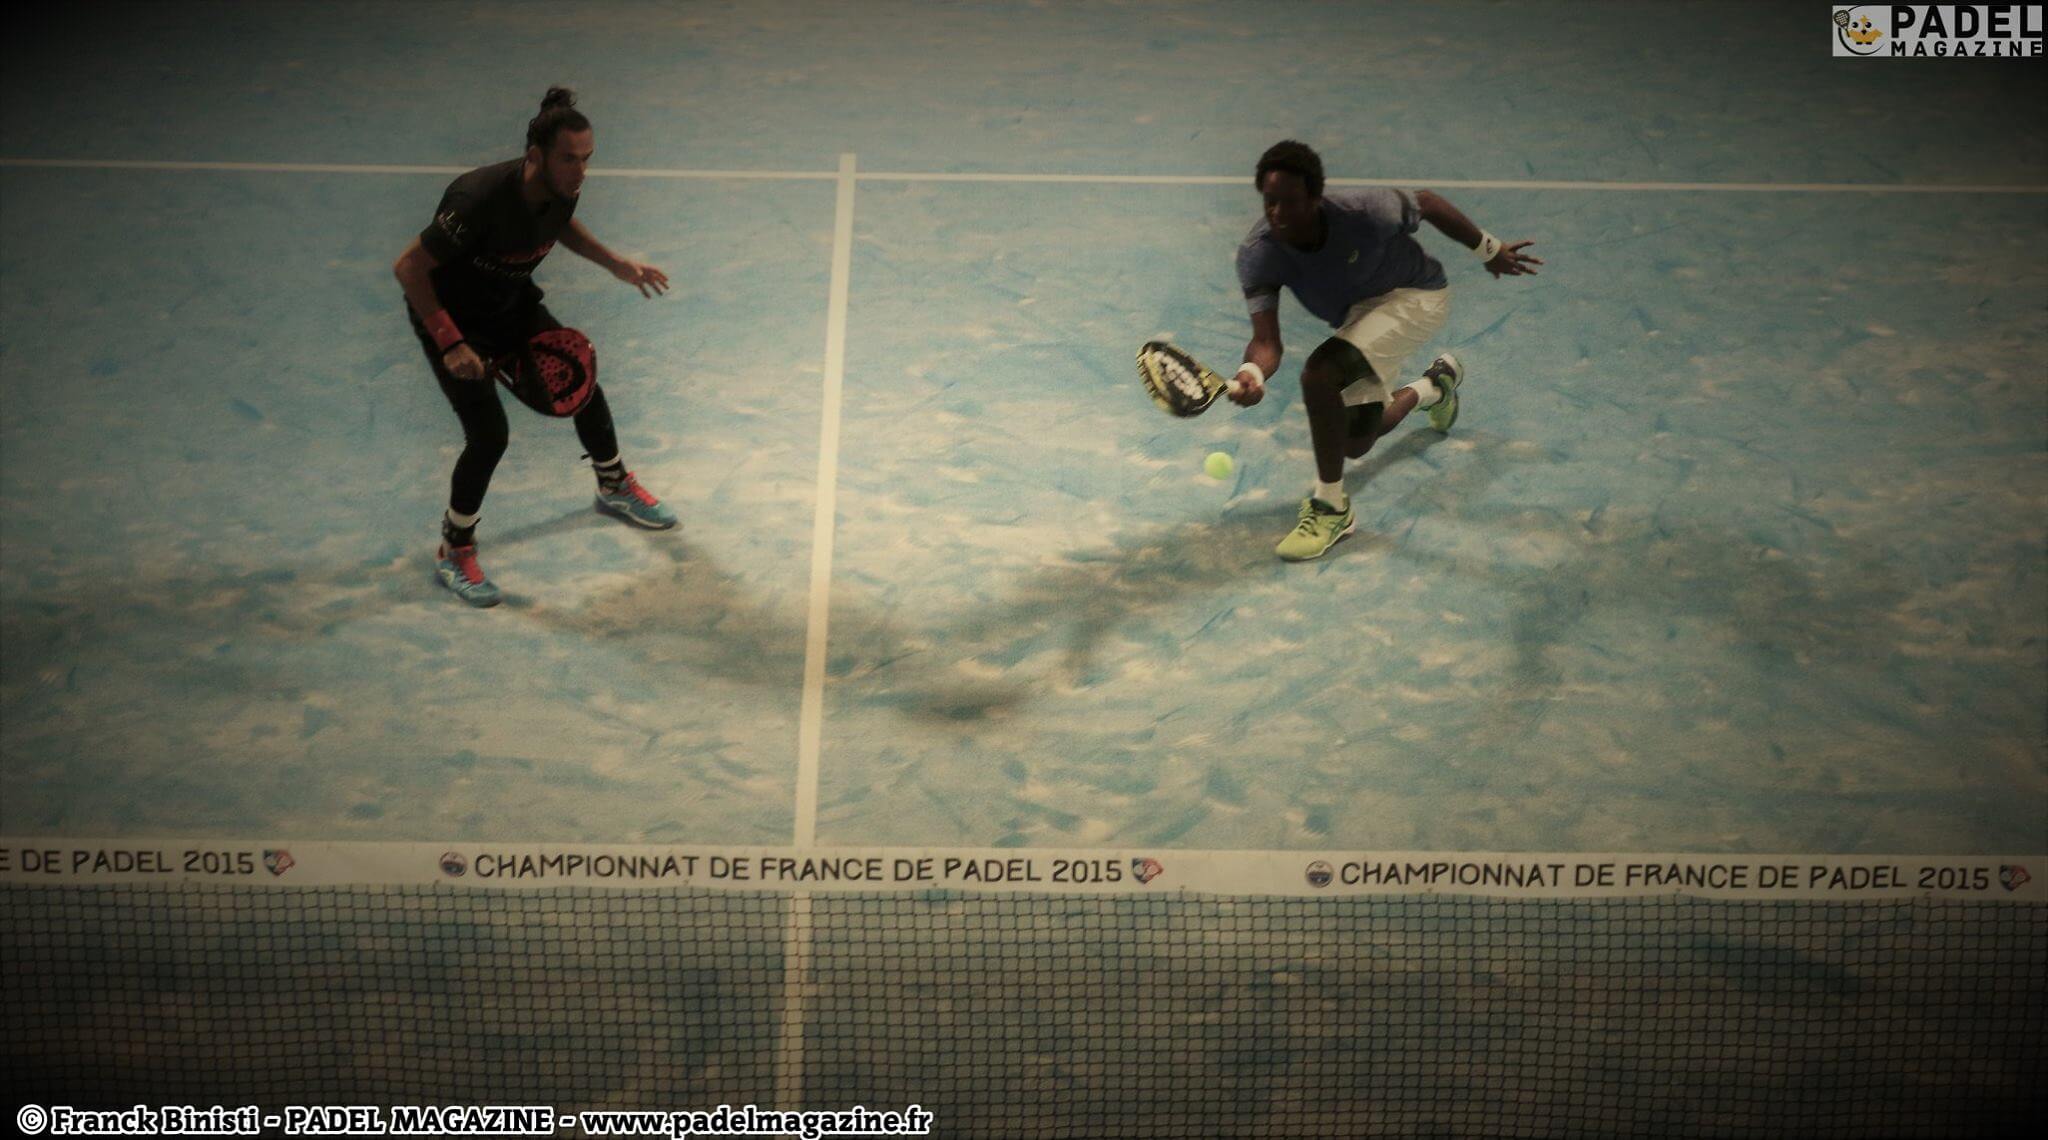 Monfils: “The padel a physical sport ”